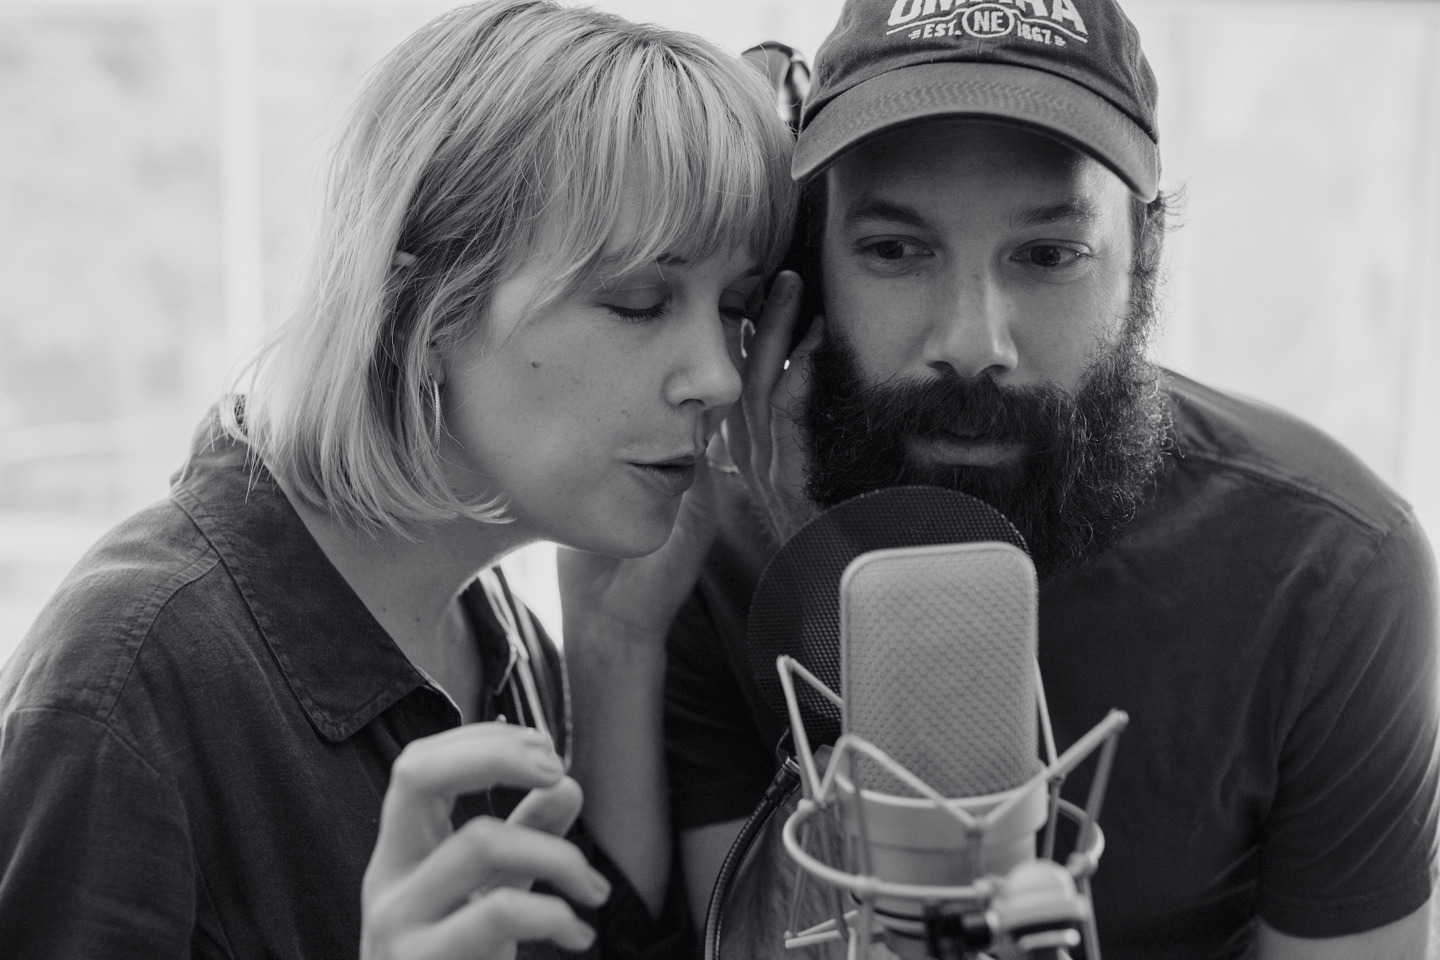 Nataly Dawn and Pomplamoose: A solid work ethic, raw talent, and dependable tools from Neumann and Sennheiser